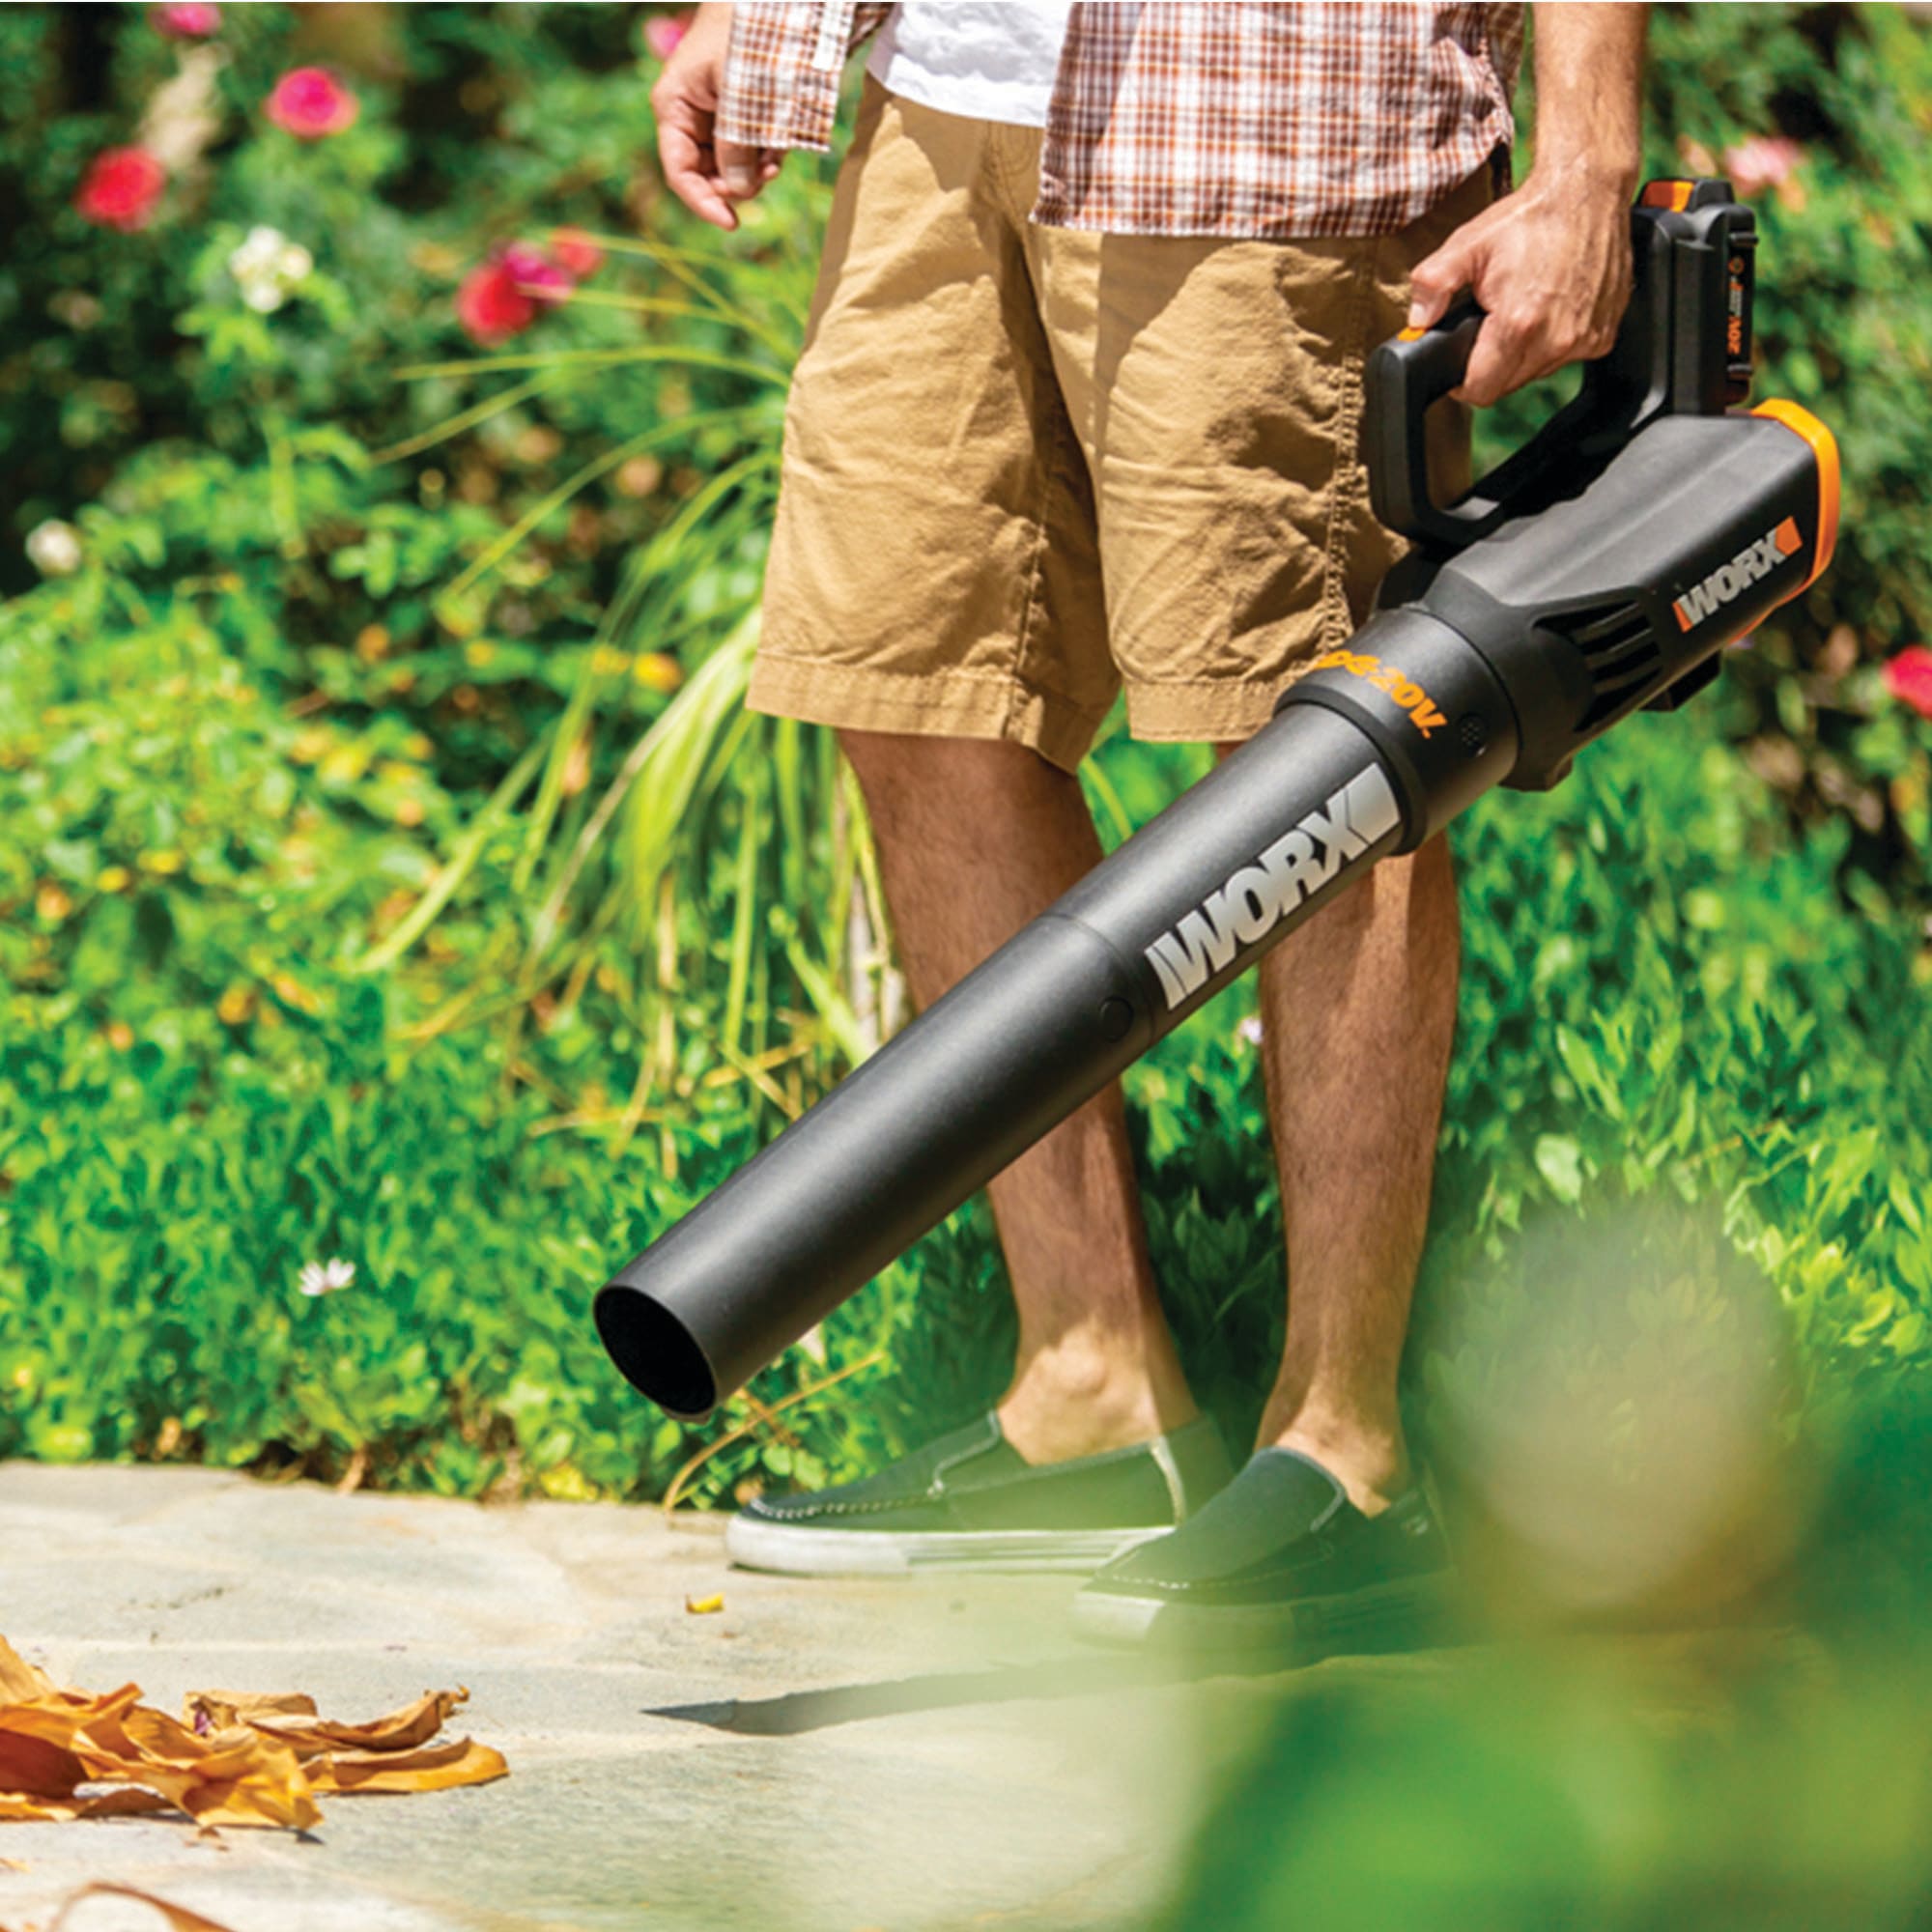 Twinkle Star Leaf Blower Cordless, Battery Powered Leaf Blower with 2  Battery and Charger, Rechargeable Electric Handheld Leaf Blowers for Patio